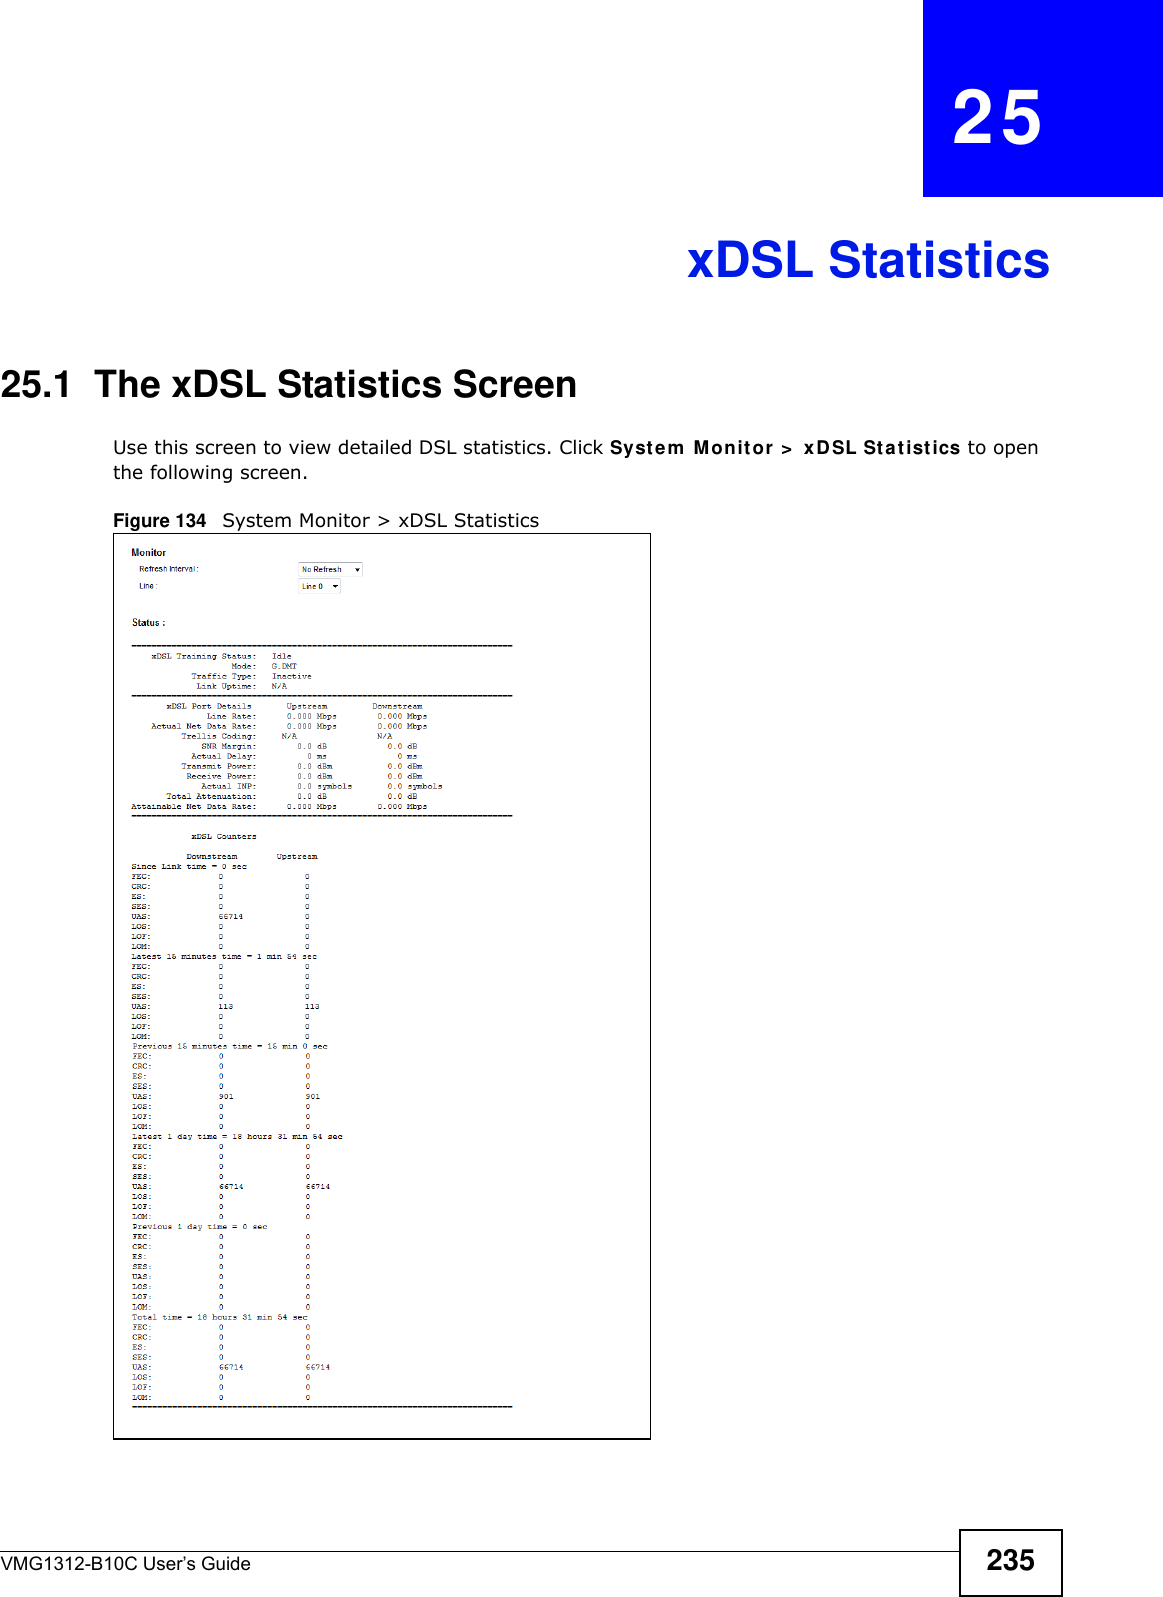 VMG1312-B10C User’s Guide 235CHAPTER   25xDSL Statistics25.1  The xDSL Statistics ScreenUse this screen to view detailed DSL statistics. Click Syst e m  M onit or  &gt;  x D SL St a t istics to open the following screen.Figure 134   System Monitor &gt; xDSL Statistics